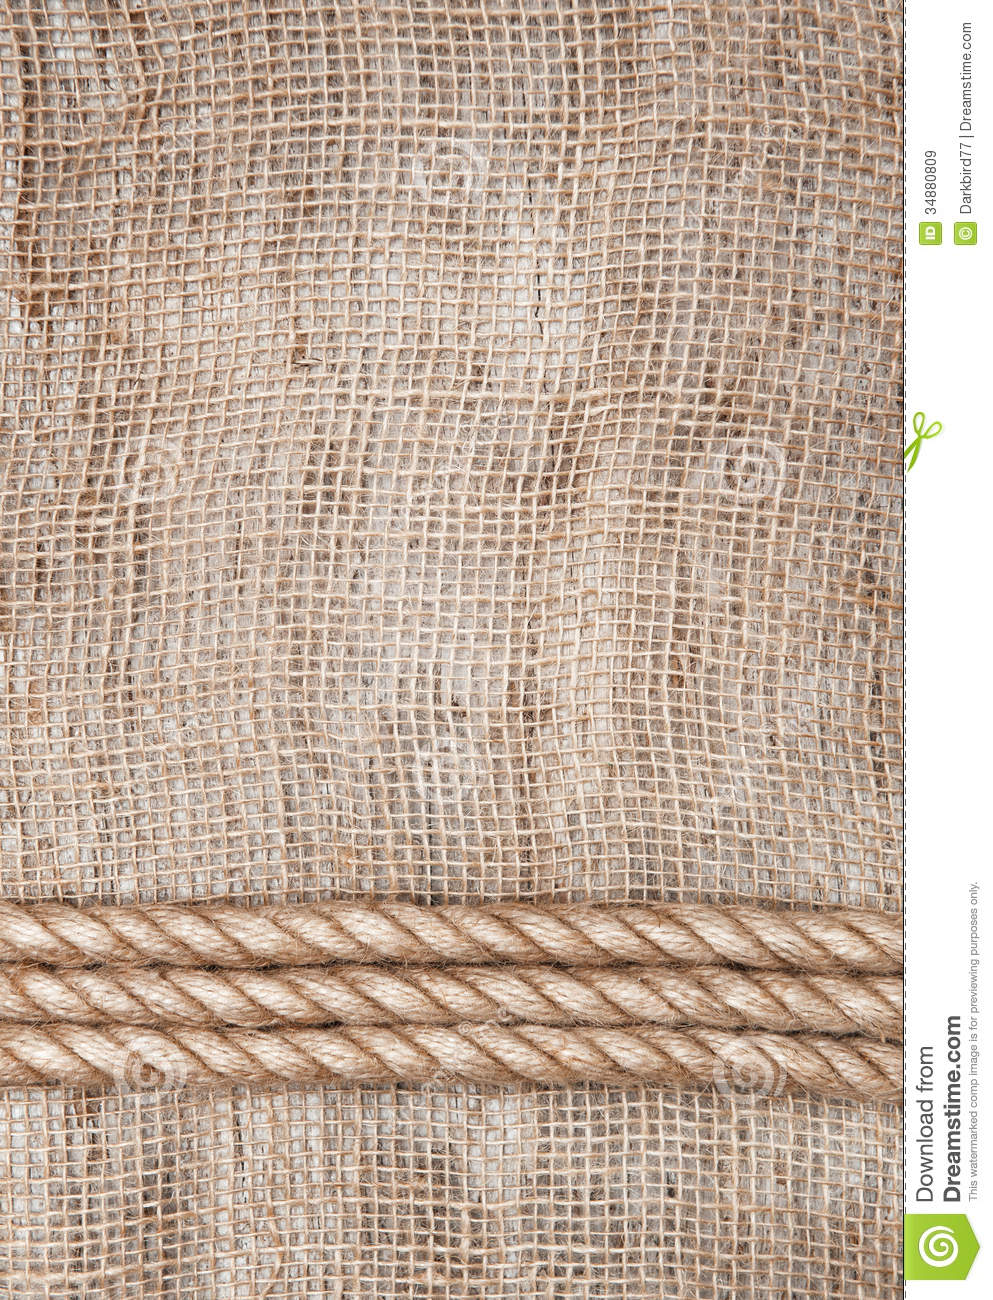 Burlap Background With Rope Royalty Free Stock Images   Image    